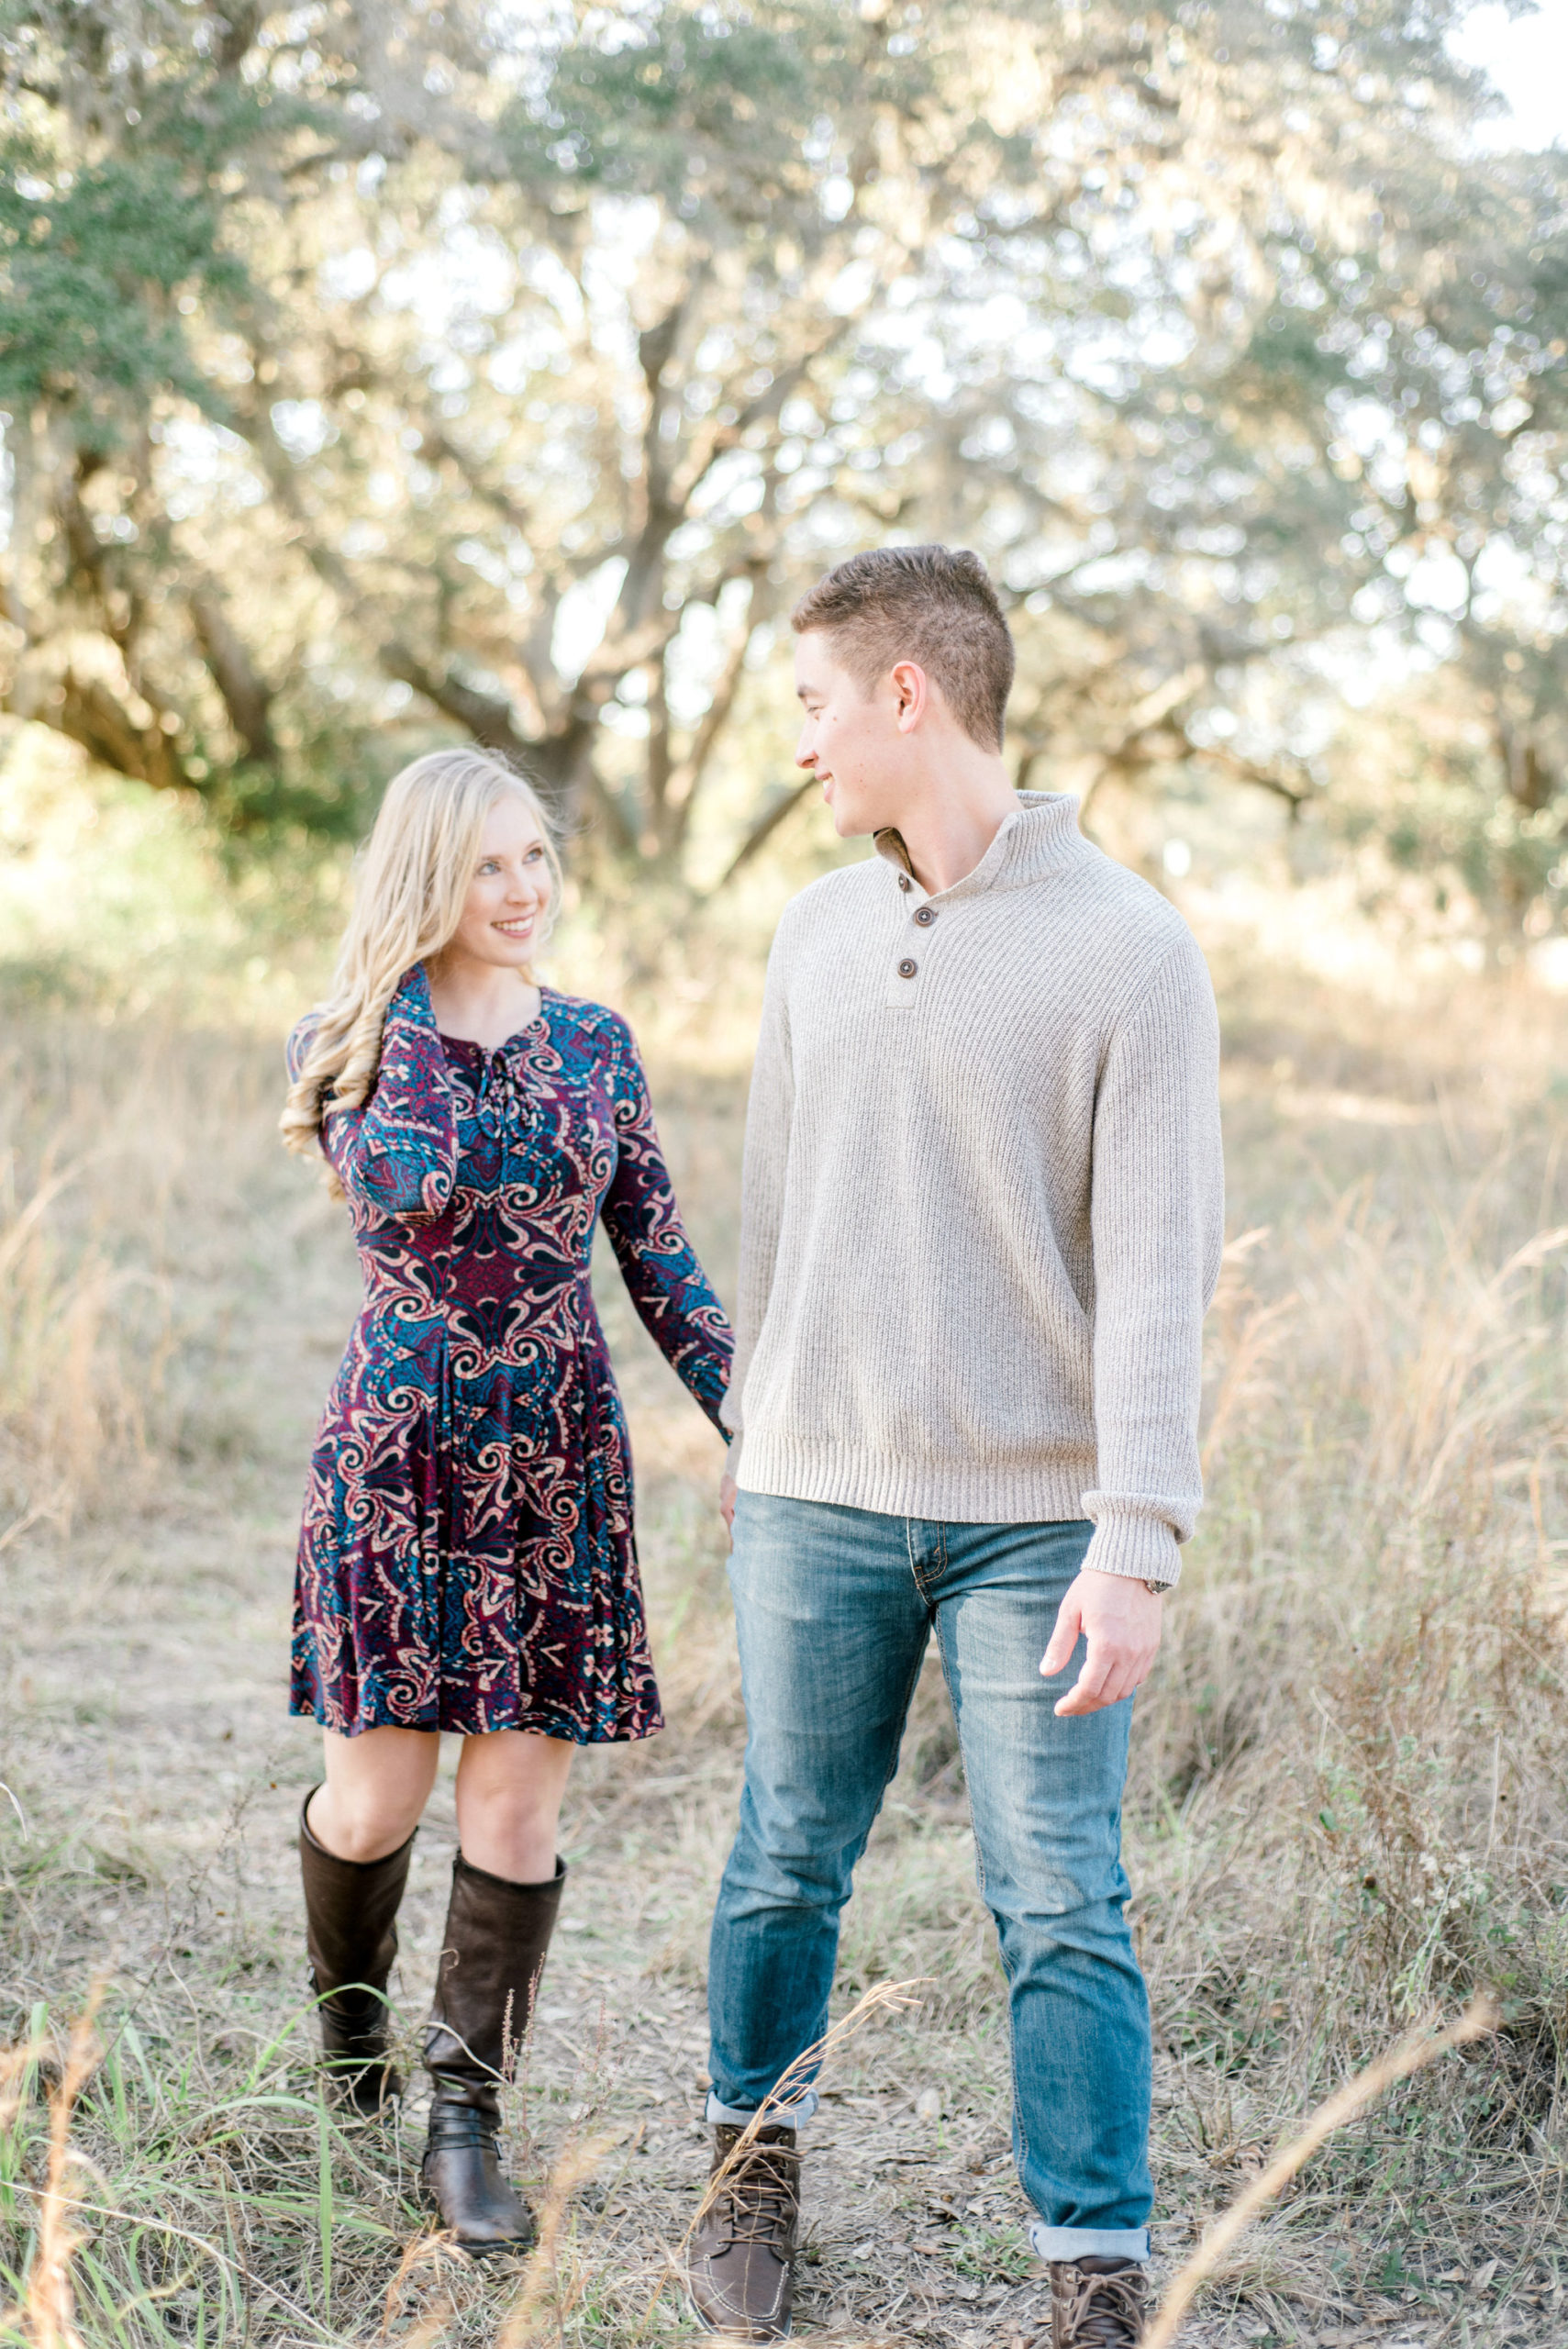 Cozy engagement session featuring Spanish moss